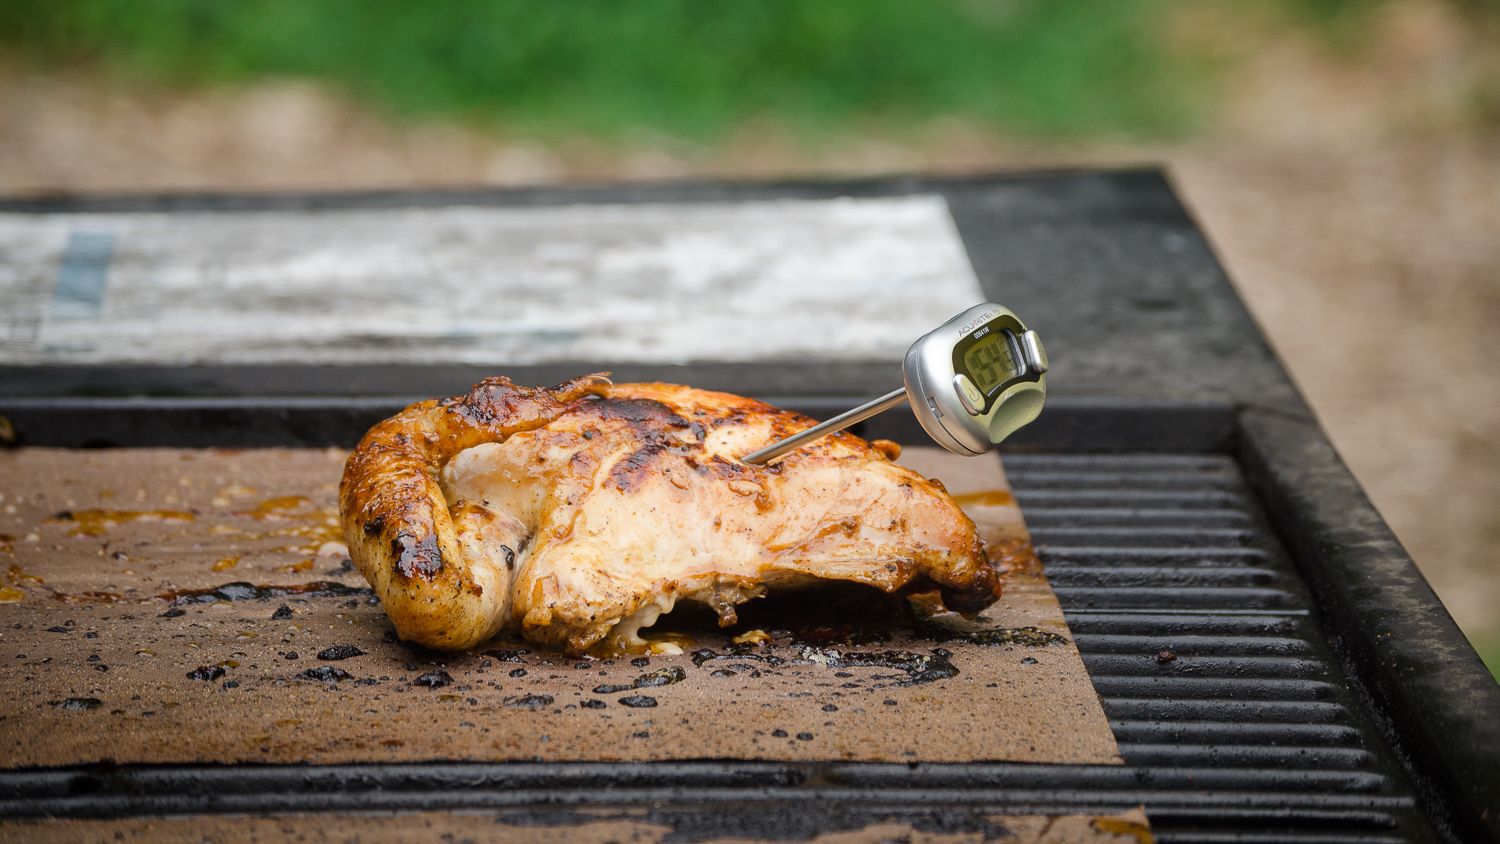 Chicken breast on an open grill with a thermometer in it